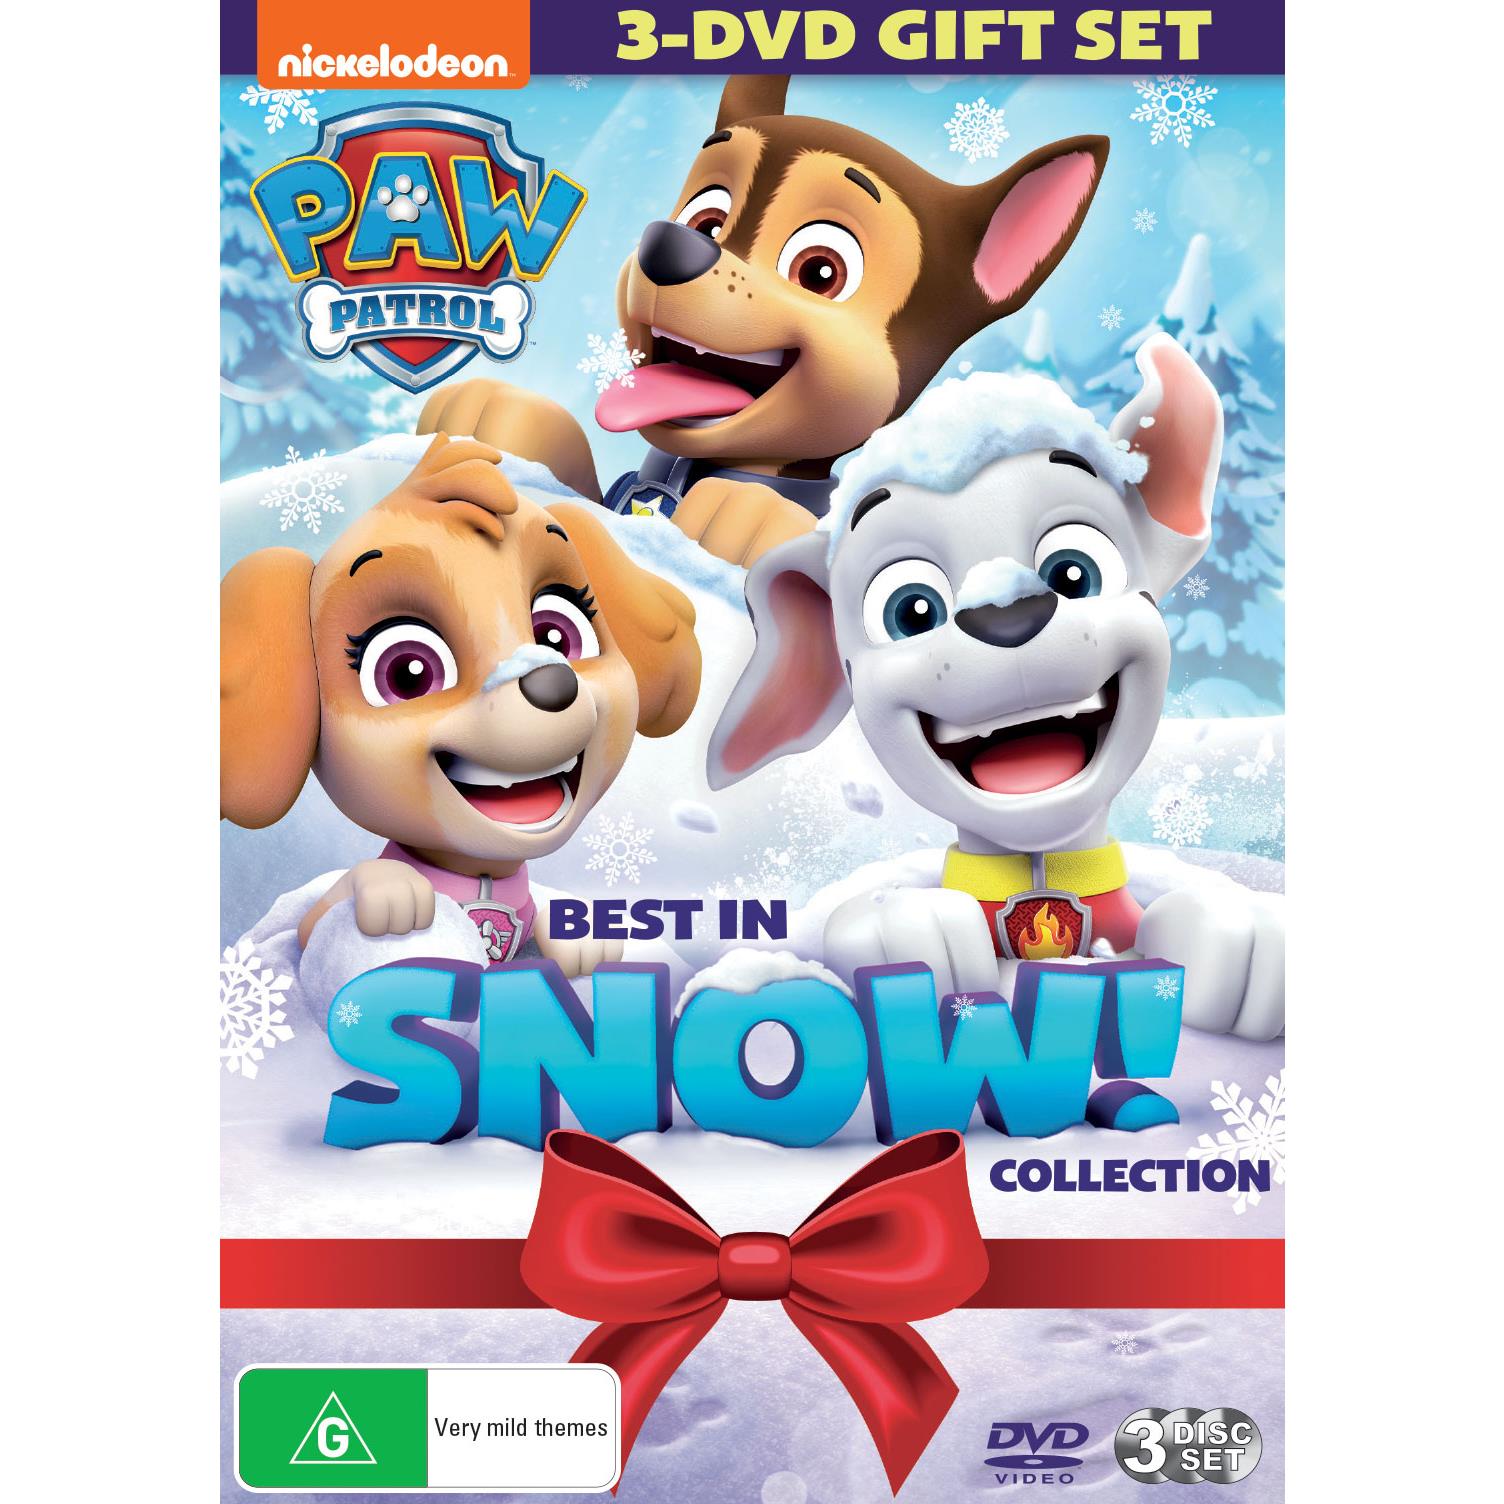 paw patrol: best in snow collection